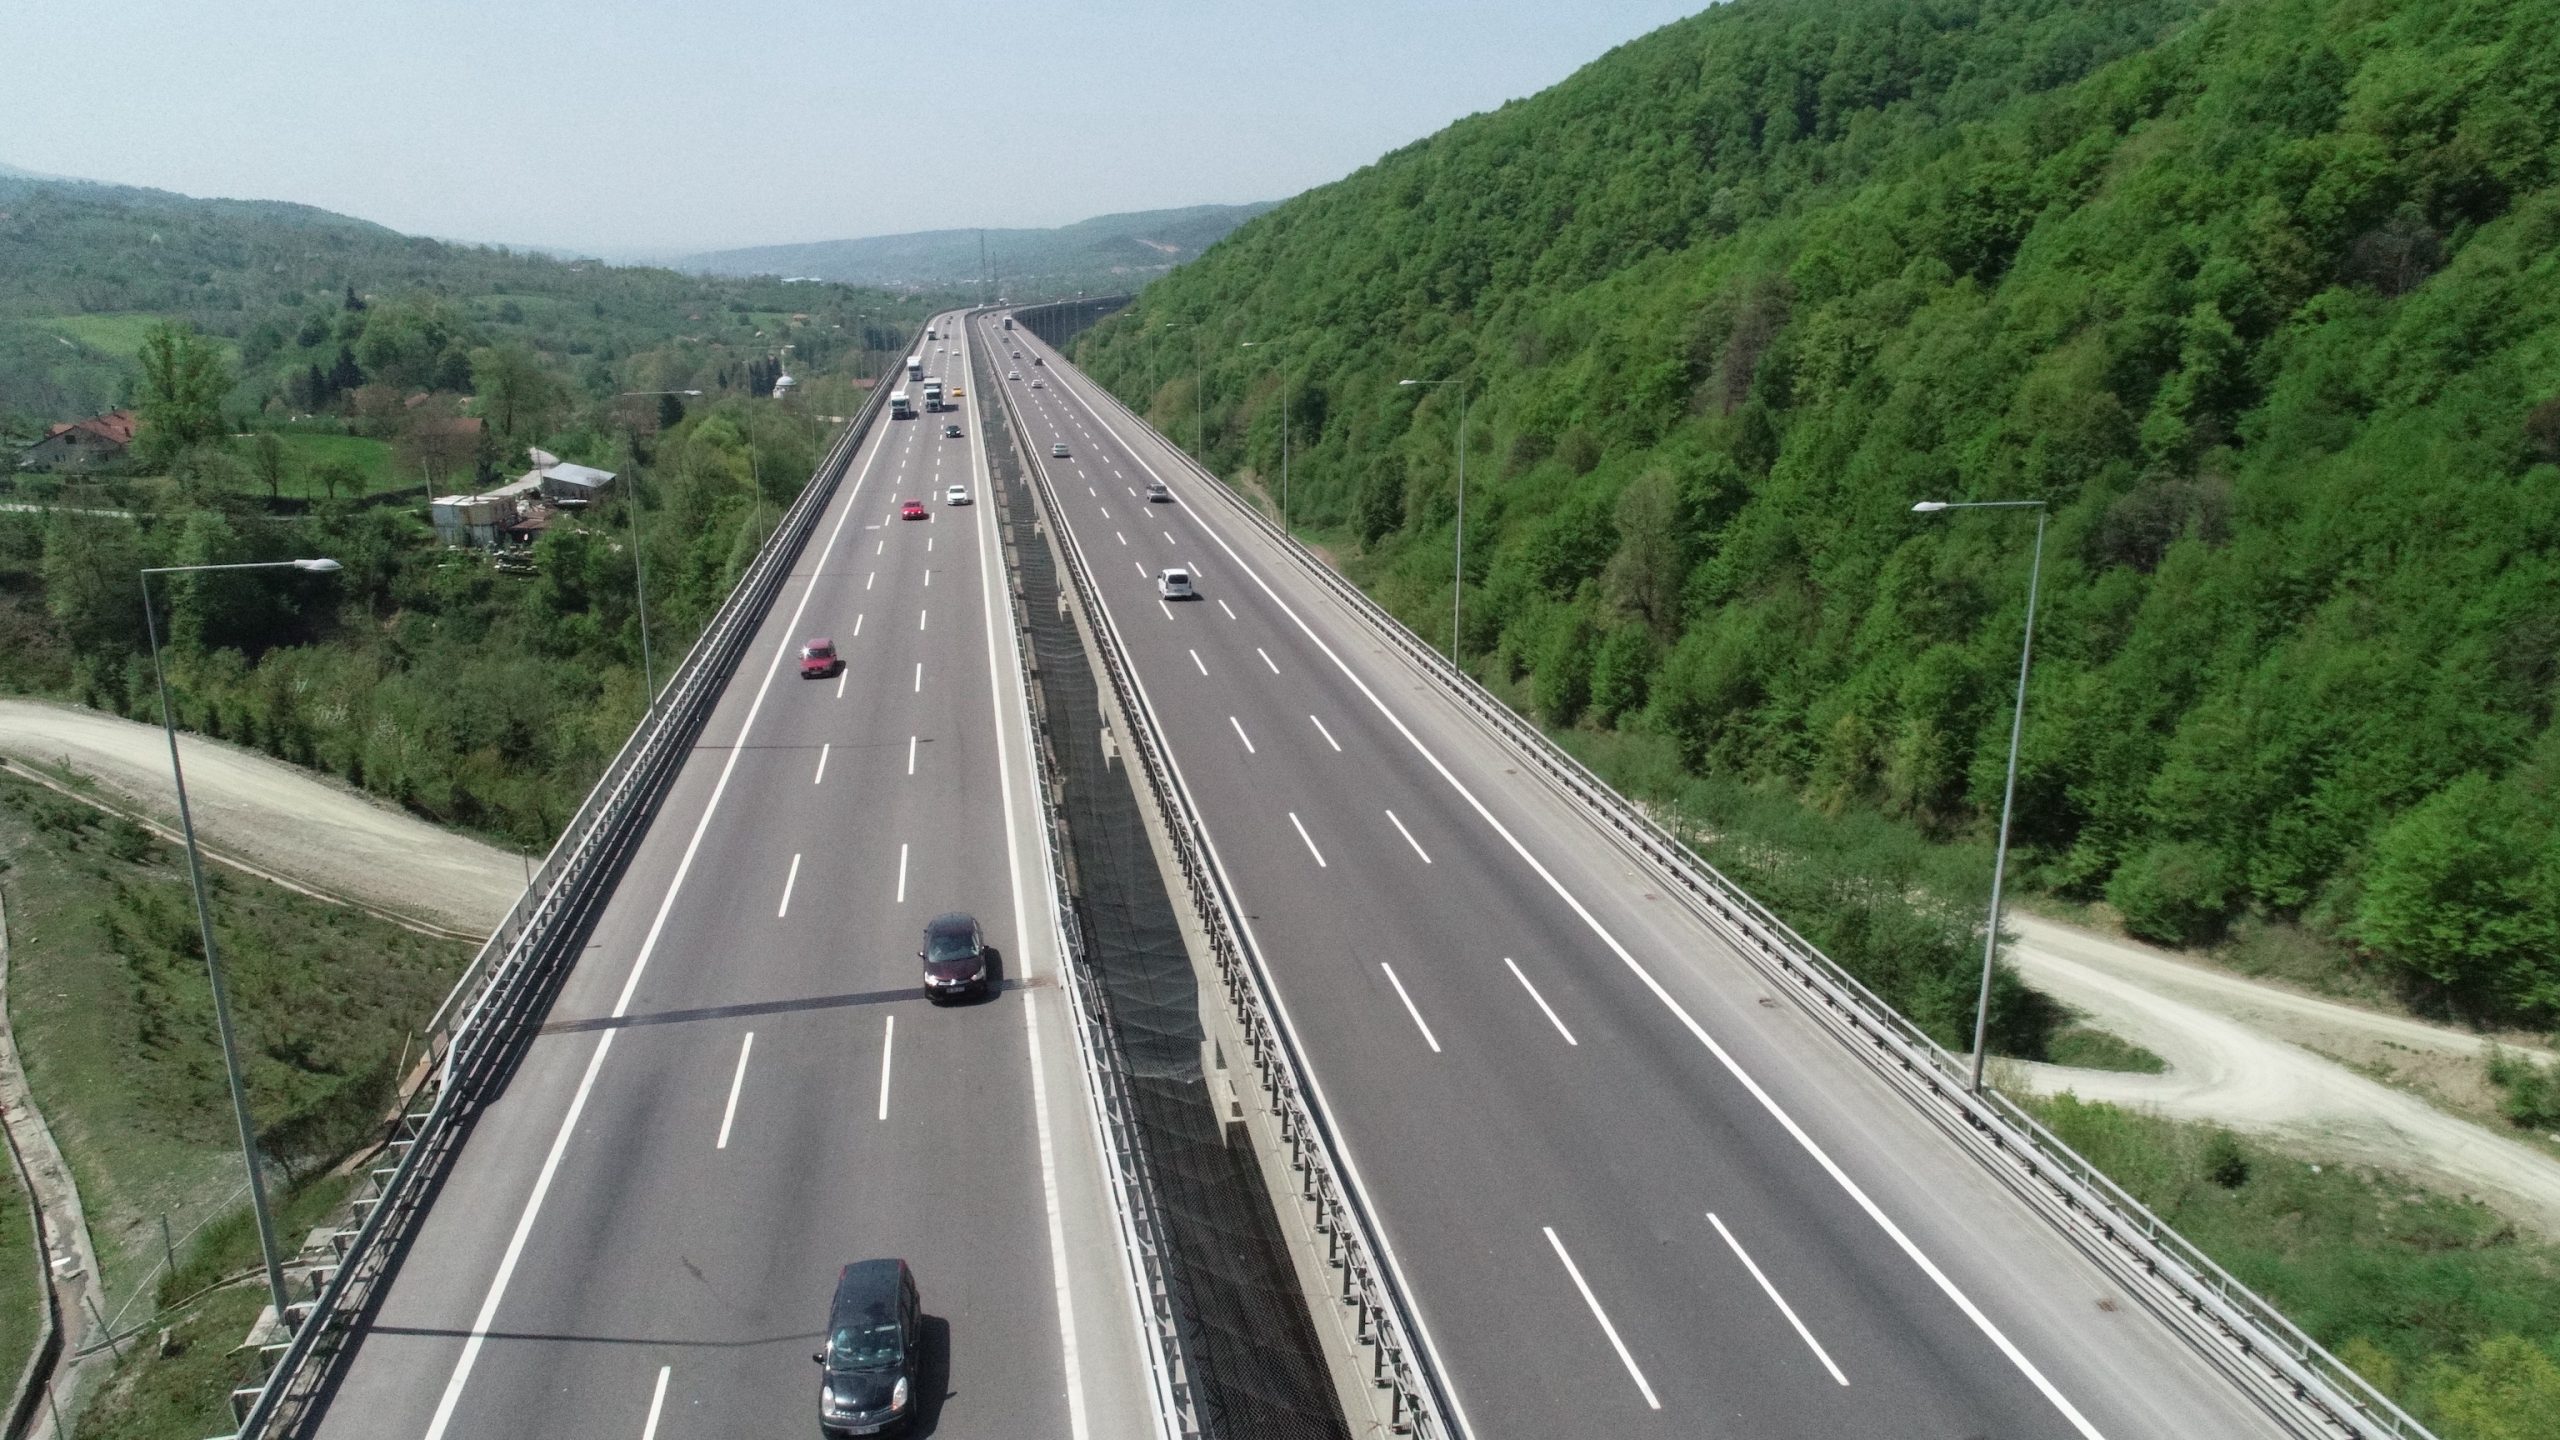 A drone photo shows Anadolu Highway with a few cars on road trips after traffic congestion decreased ahead of full lockdown